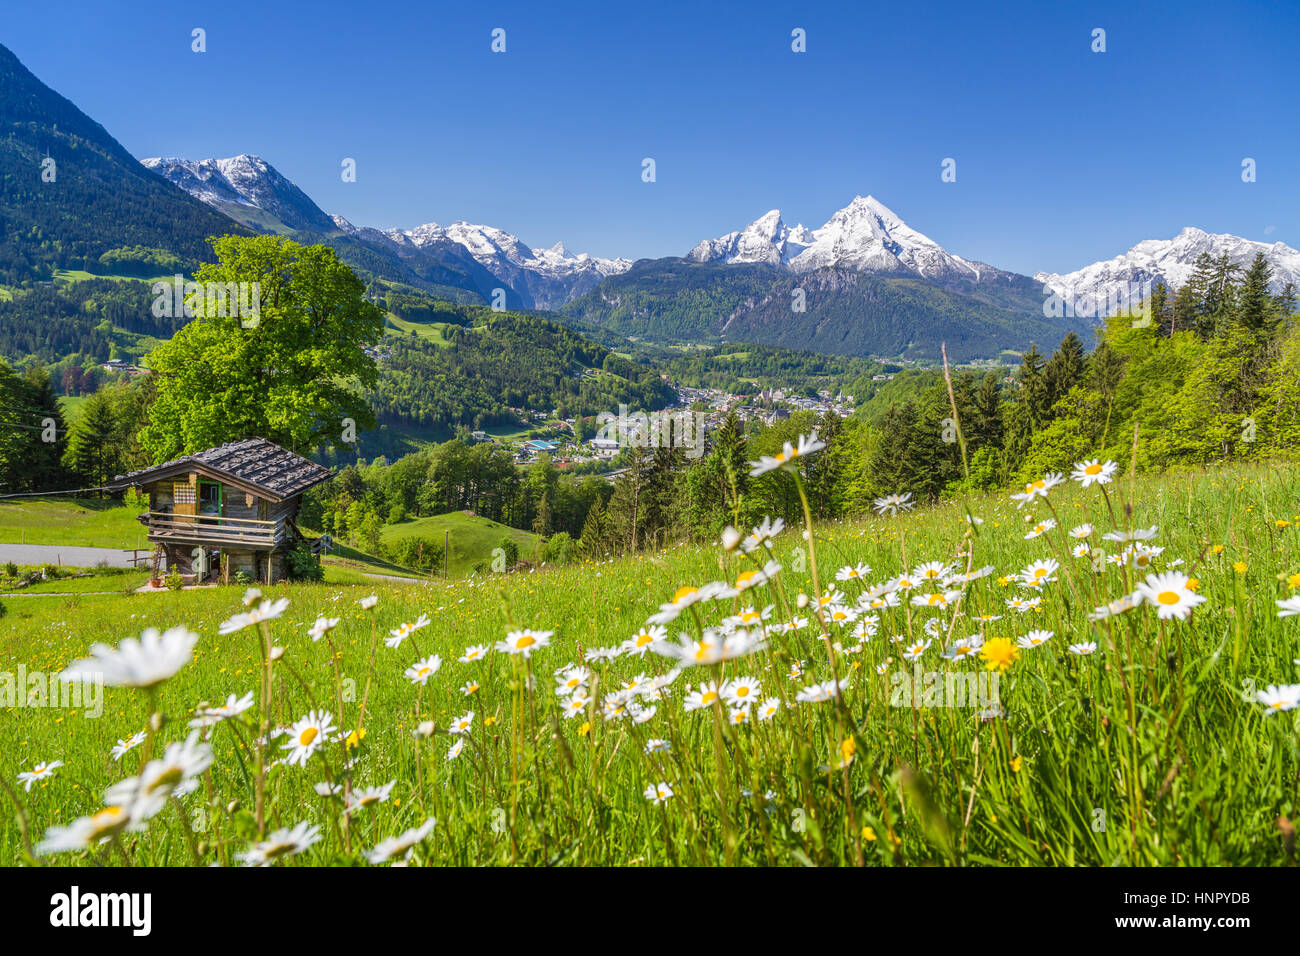 Idyllic mountain scenery in the Alps with traditional old mountain chalet and fresh green meadows on a beautiful sunny day with blue sky in springtime Stock Photo